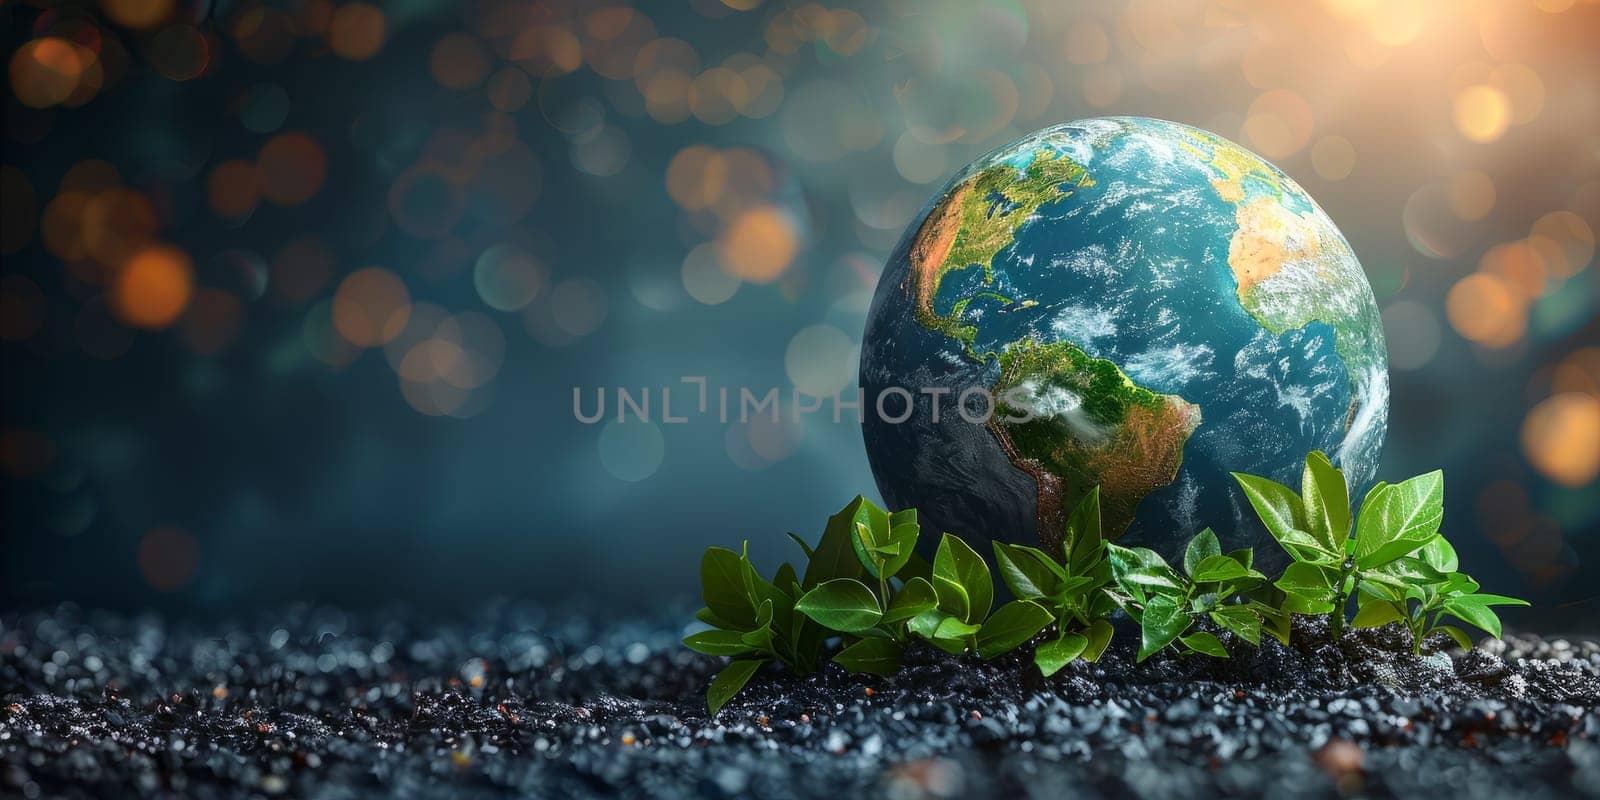 Earth Day concept, image of a planet Earth with green leaves growing out of the ground in front of it.